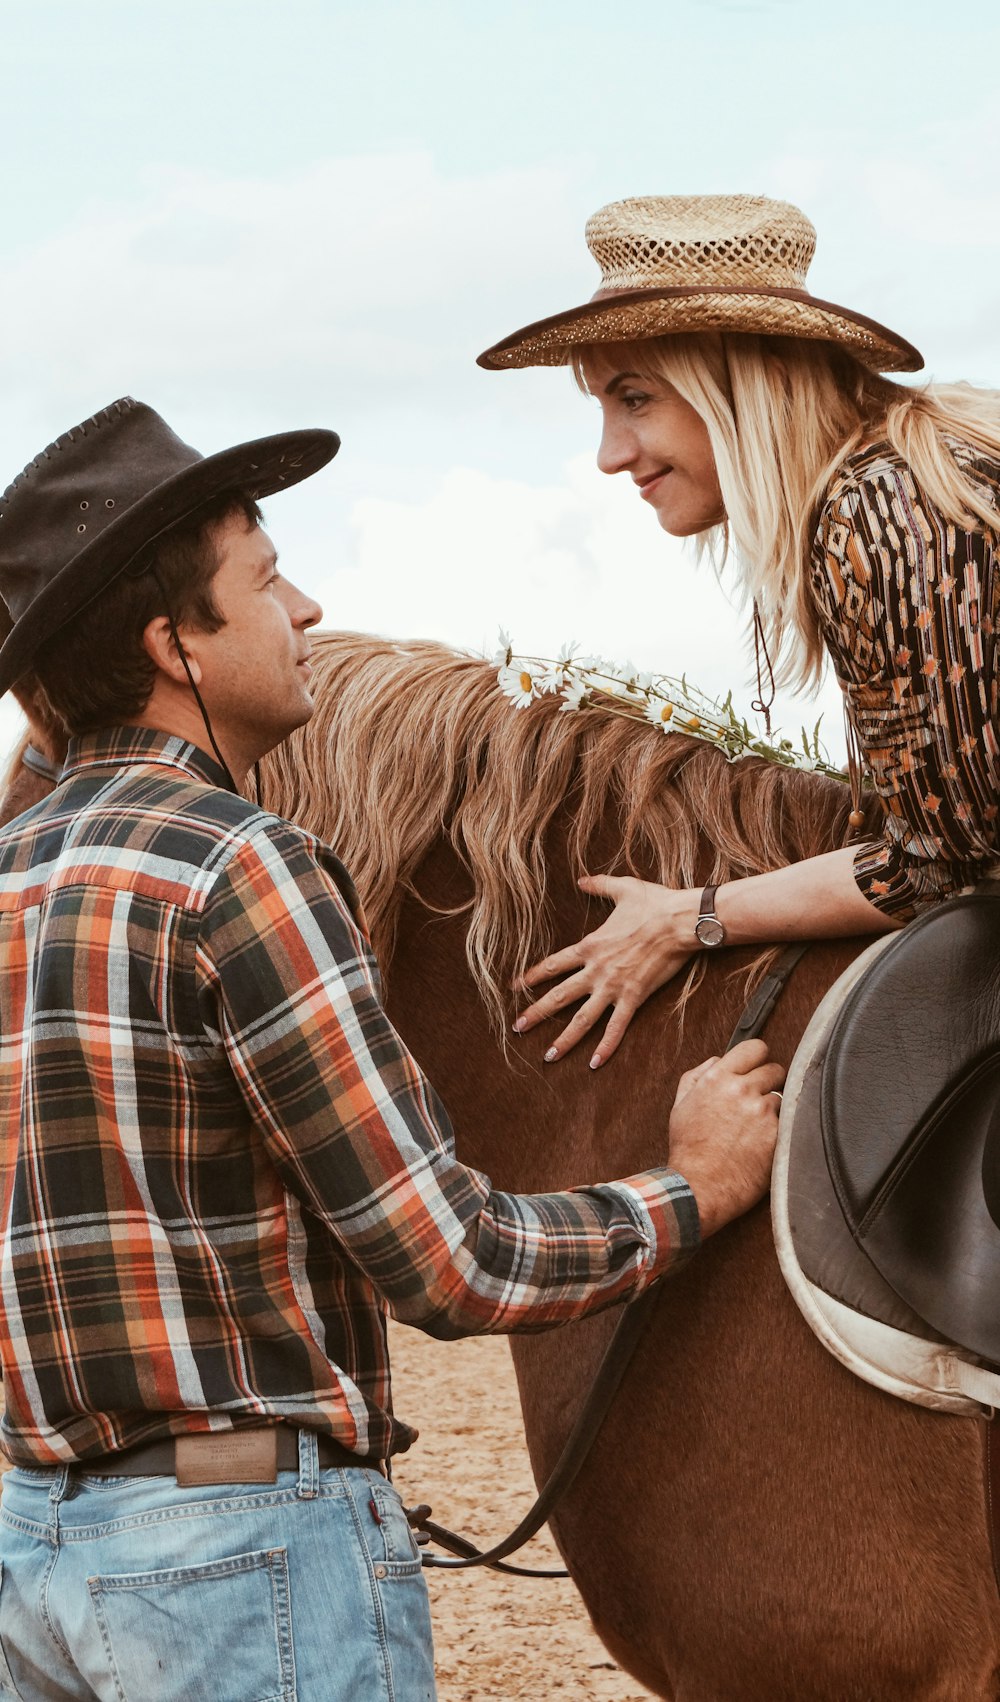 man in blue white and red plaid dress shirt and woman in brown cowboy hat